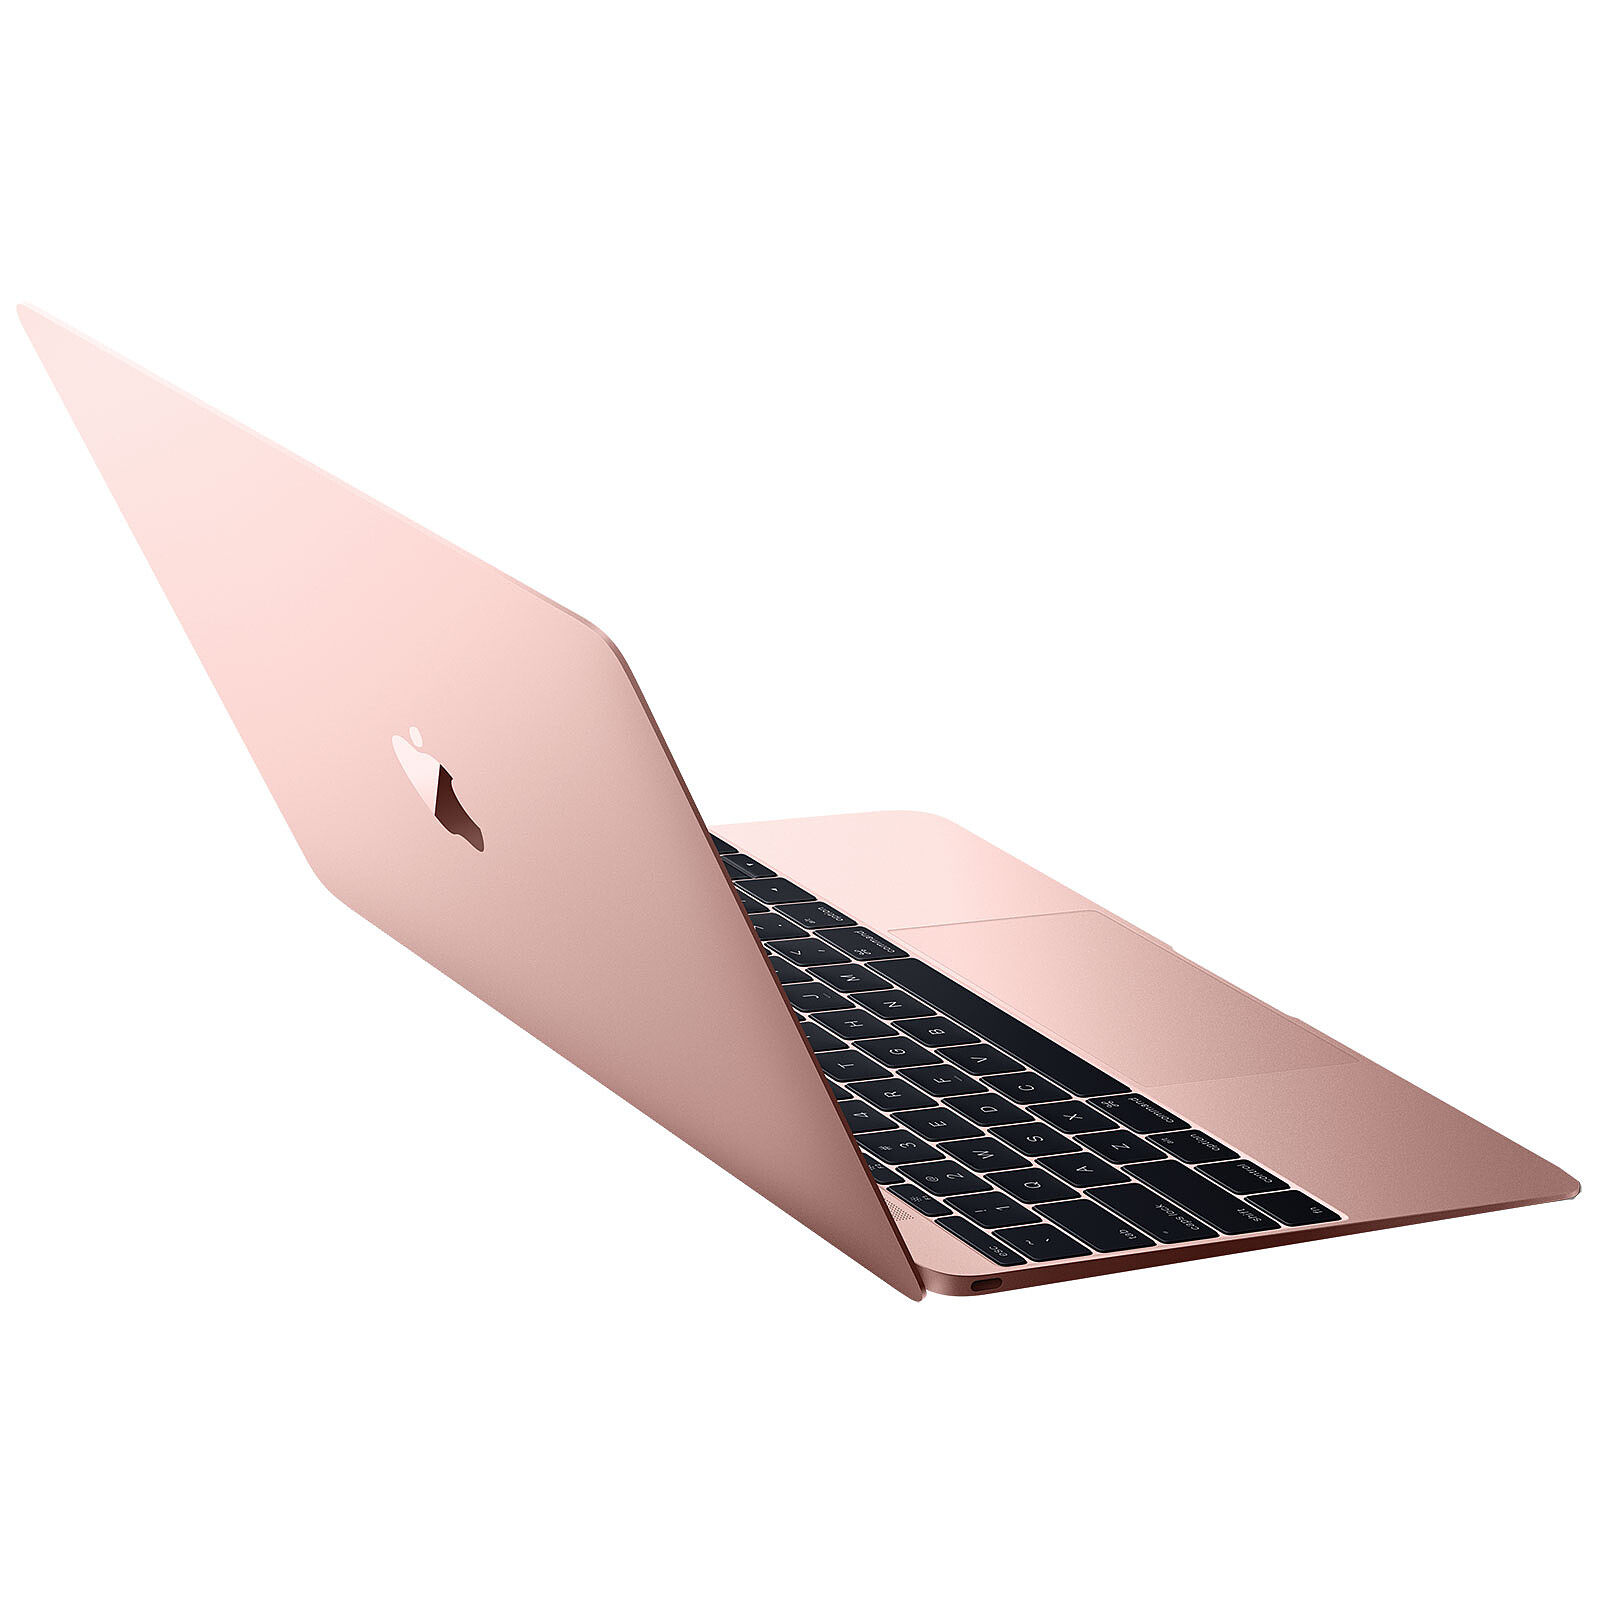 Apple MacBook (2016) 12 Or rose (MMGM2FN/A) · Reconditionné